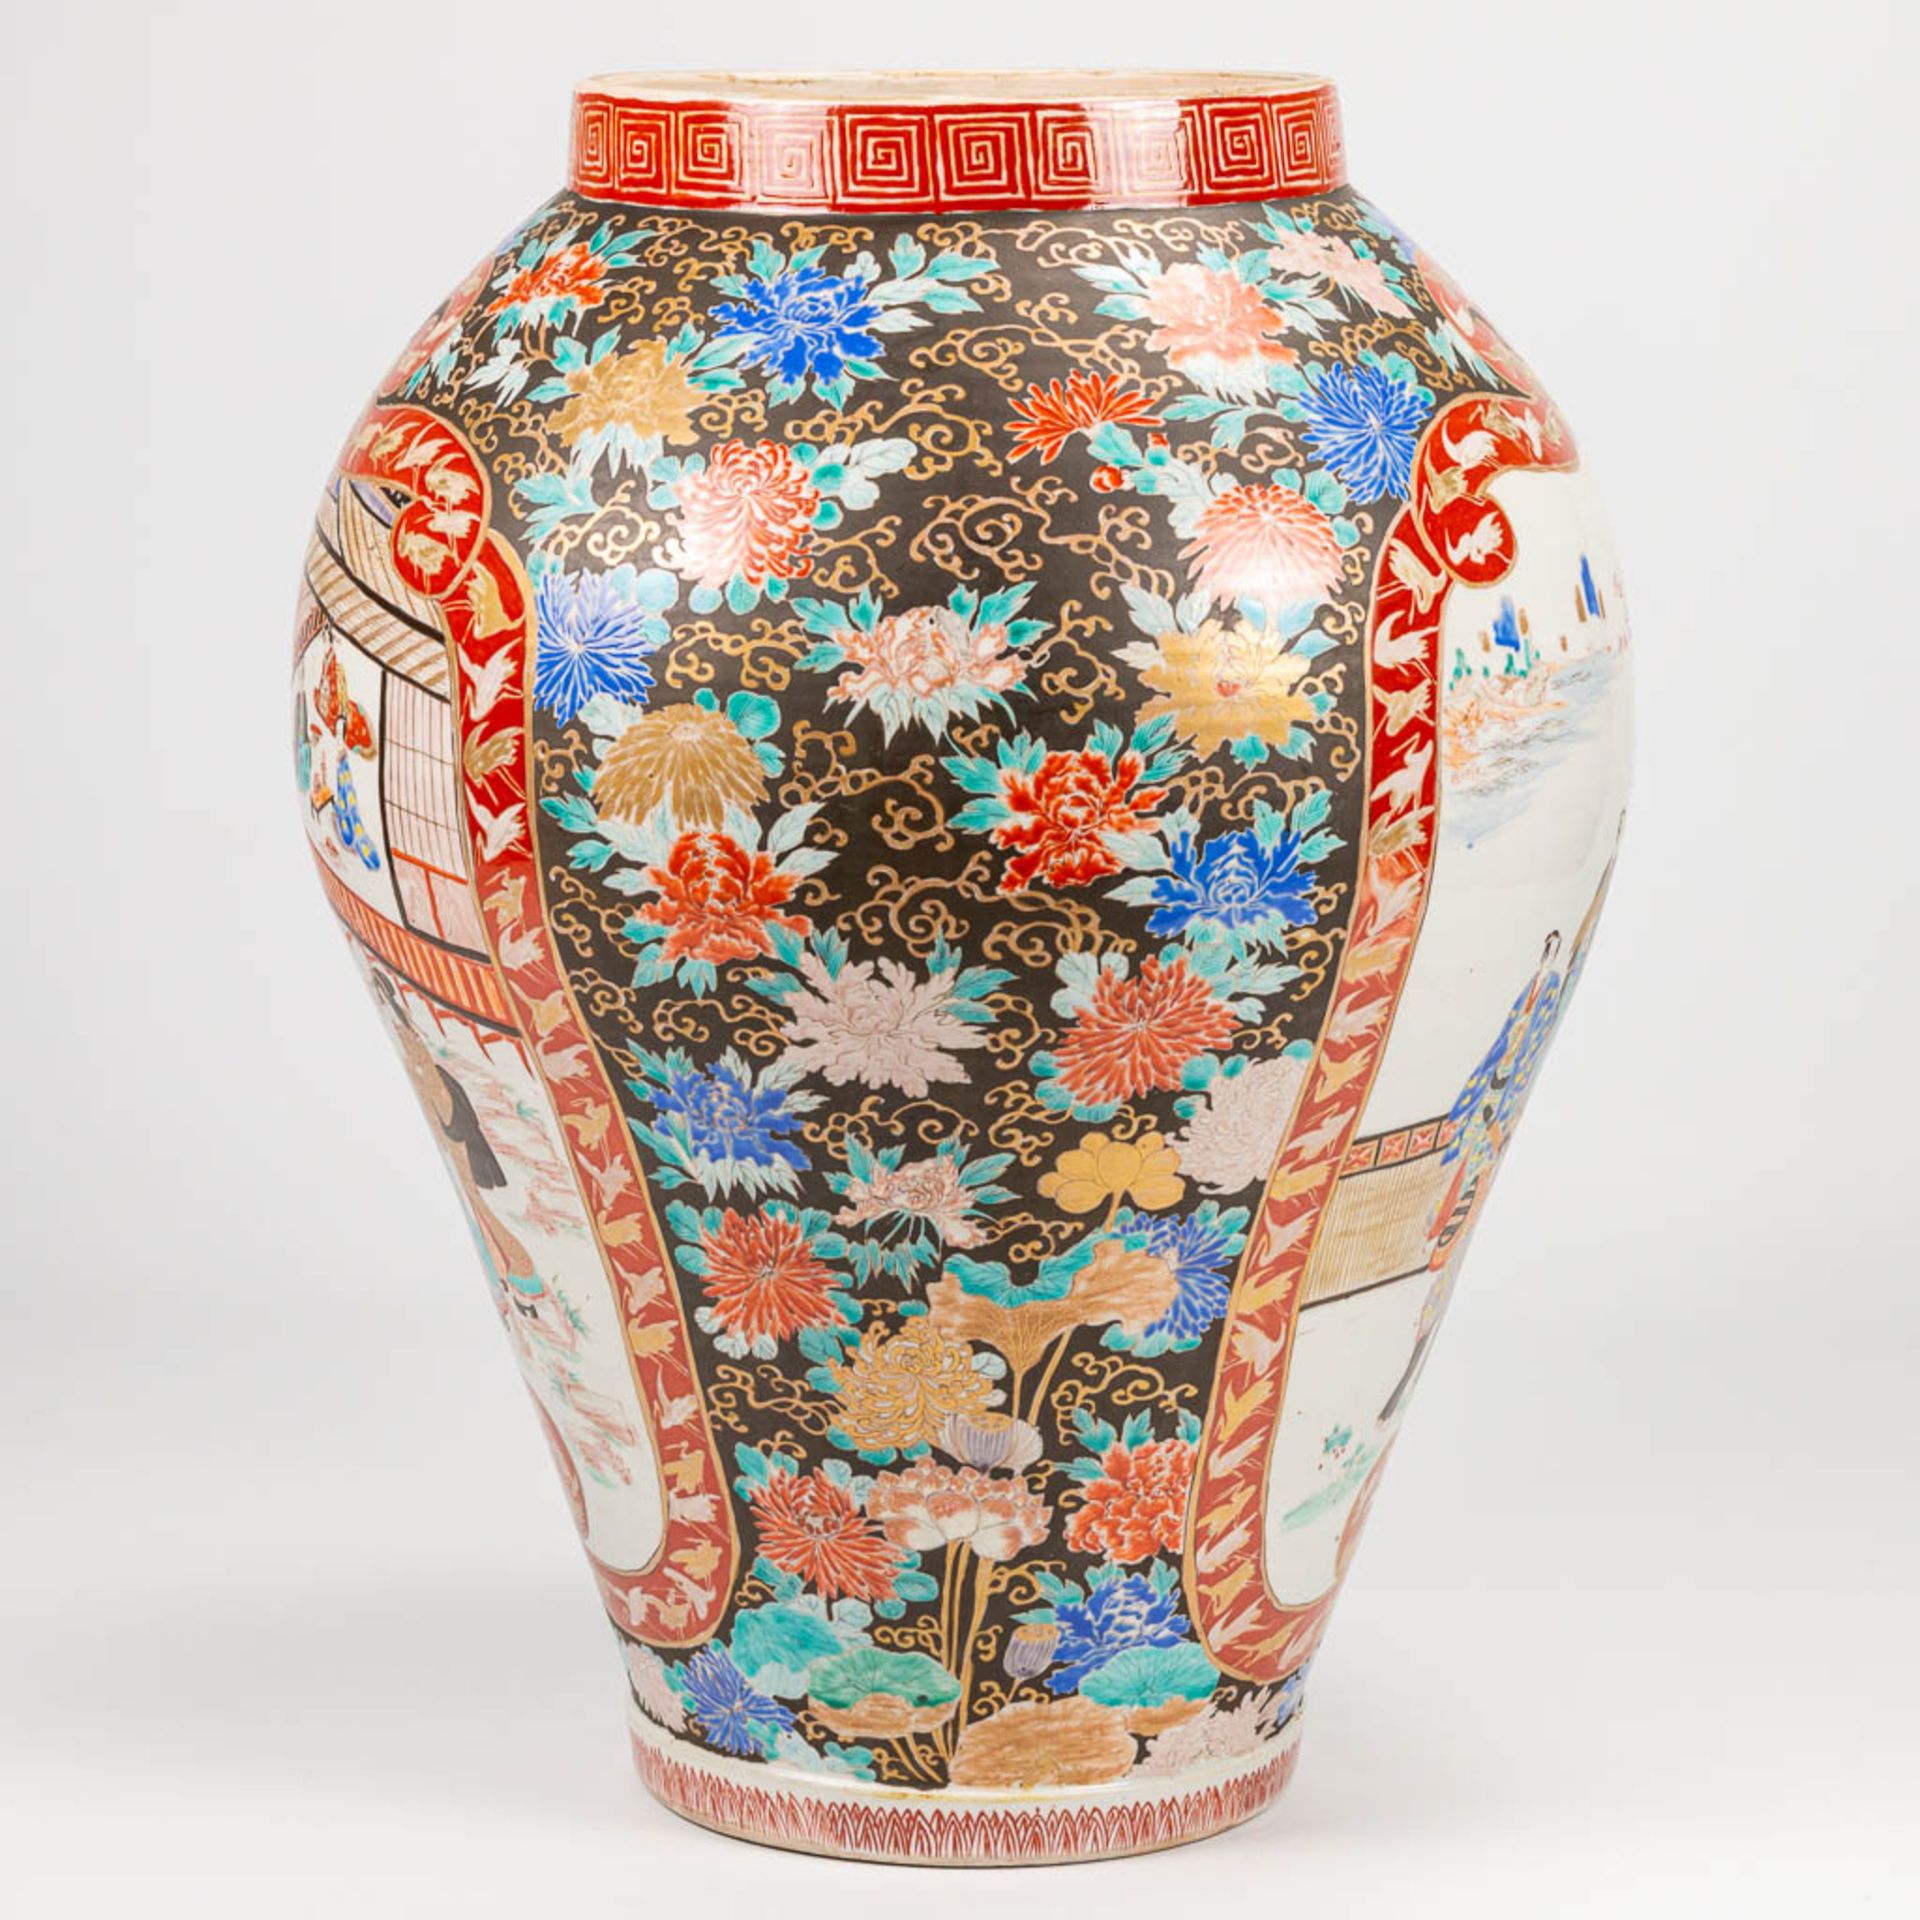 A large Imari display vase made of hand-painted porcelain in Japan. 19th/20th century. (60 x 42 cm) - Image 12 of 21